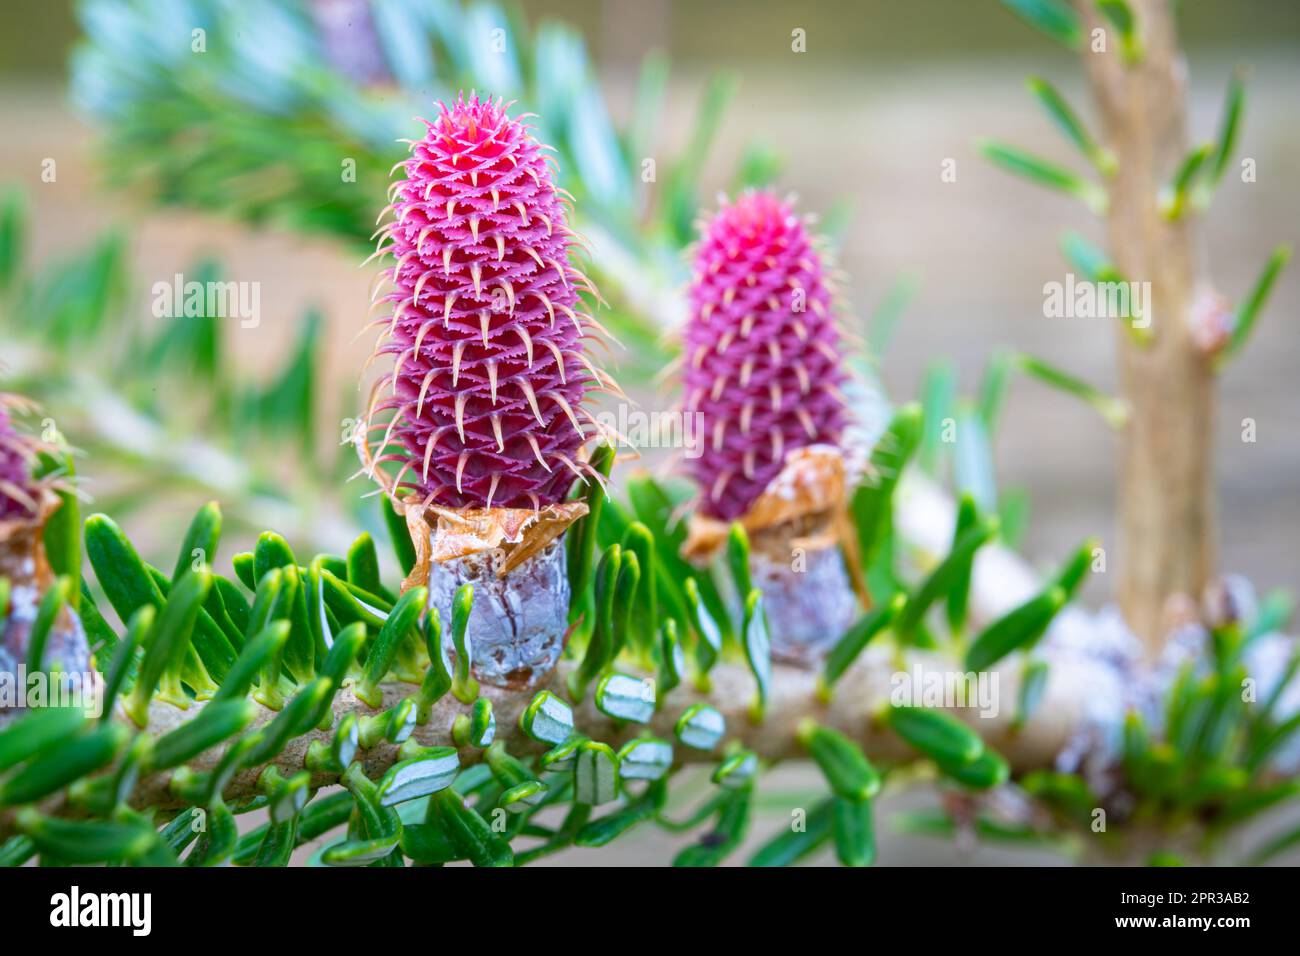 Detailed image of young purple cones of a Korean fir (Abies koreana) Stock Photo